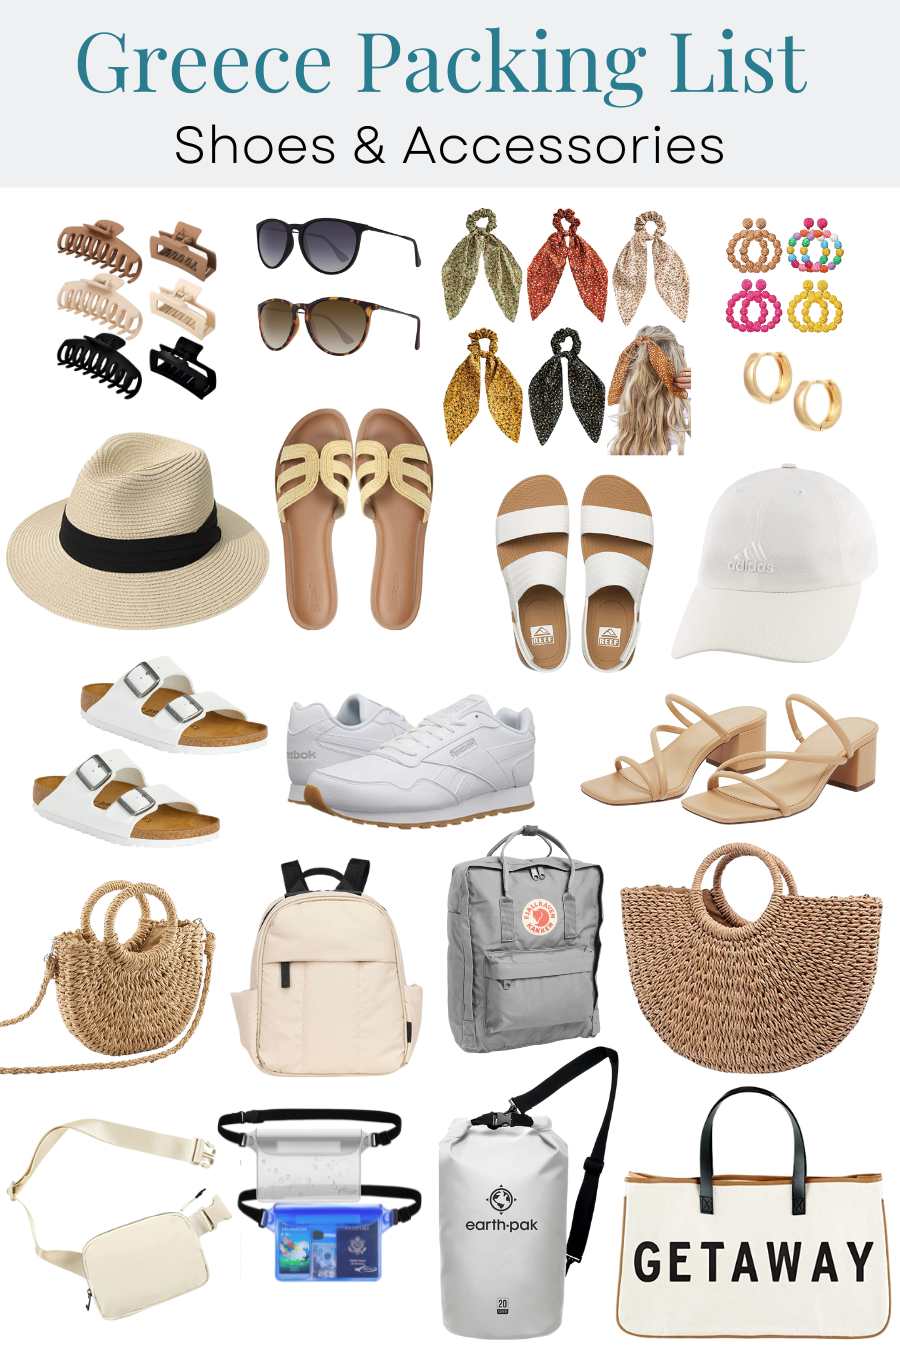 Greece packing list shoes and accessories